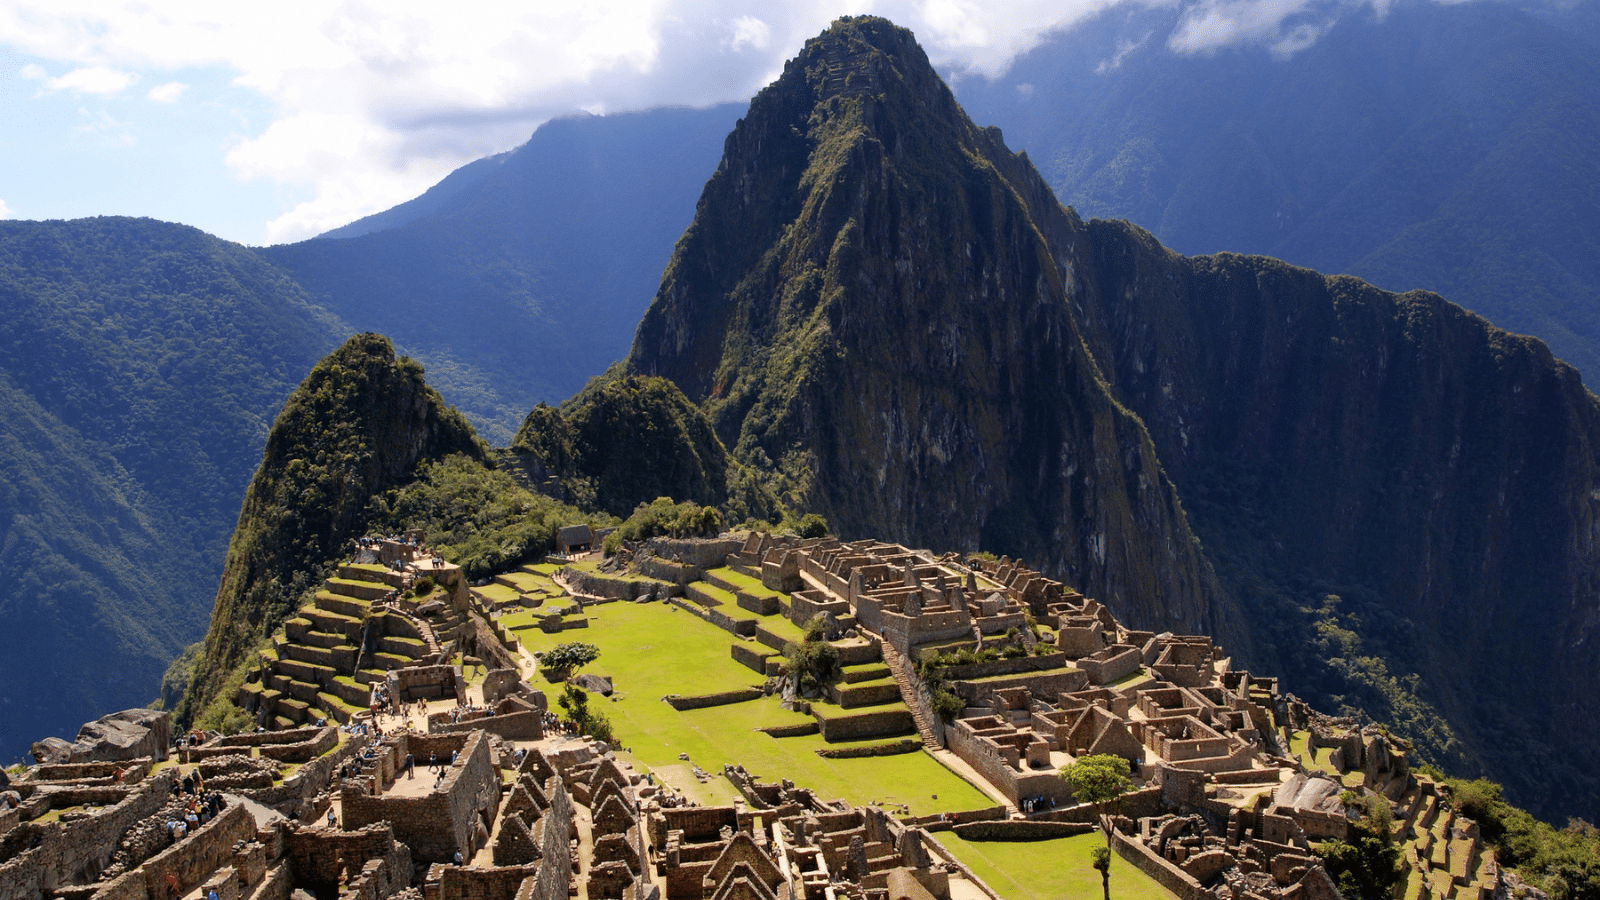 <p><span>The ruins of Incan Empire has attract many tourists every year since it is a historical place to see with one’s own eyes. With landslides and erosions, the ruins can collapse anytime unless there are rules and regulations that are put in place. </span></p><ul> <li><a href="https://themoneydreamer.com/disney-rides-that-dont-exist-anymore/"> Disney Rides That Have Become Part of Theme Park History</a></li> </ul>